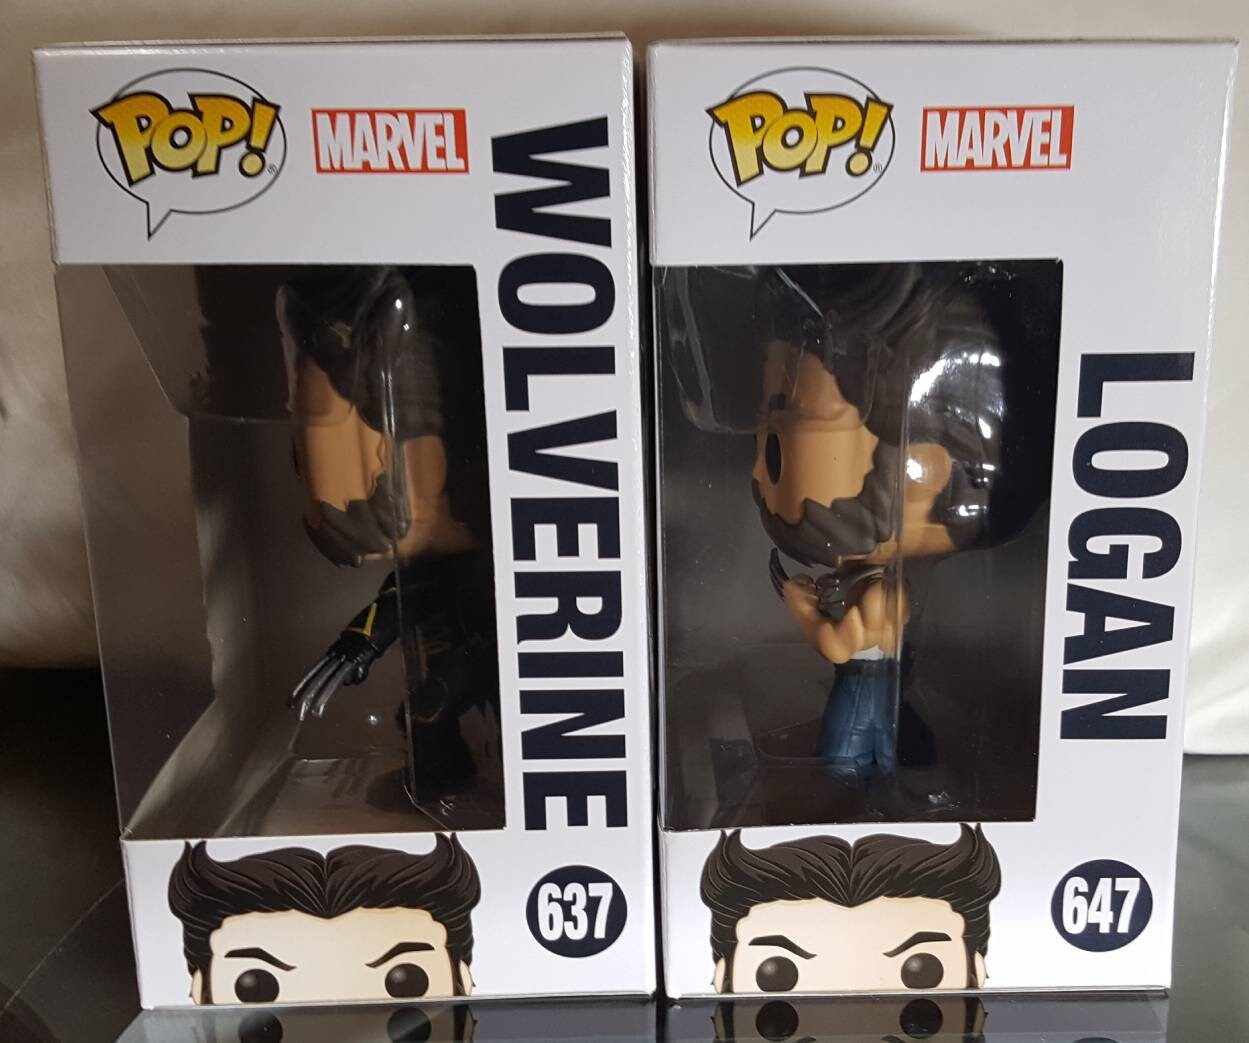 Wolverine Logan funko set # 637 and # 647 from Marvel